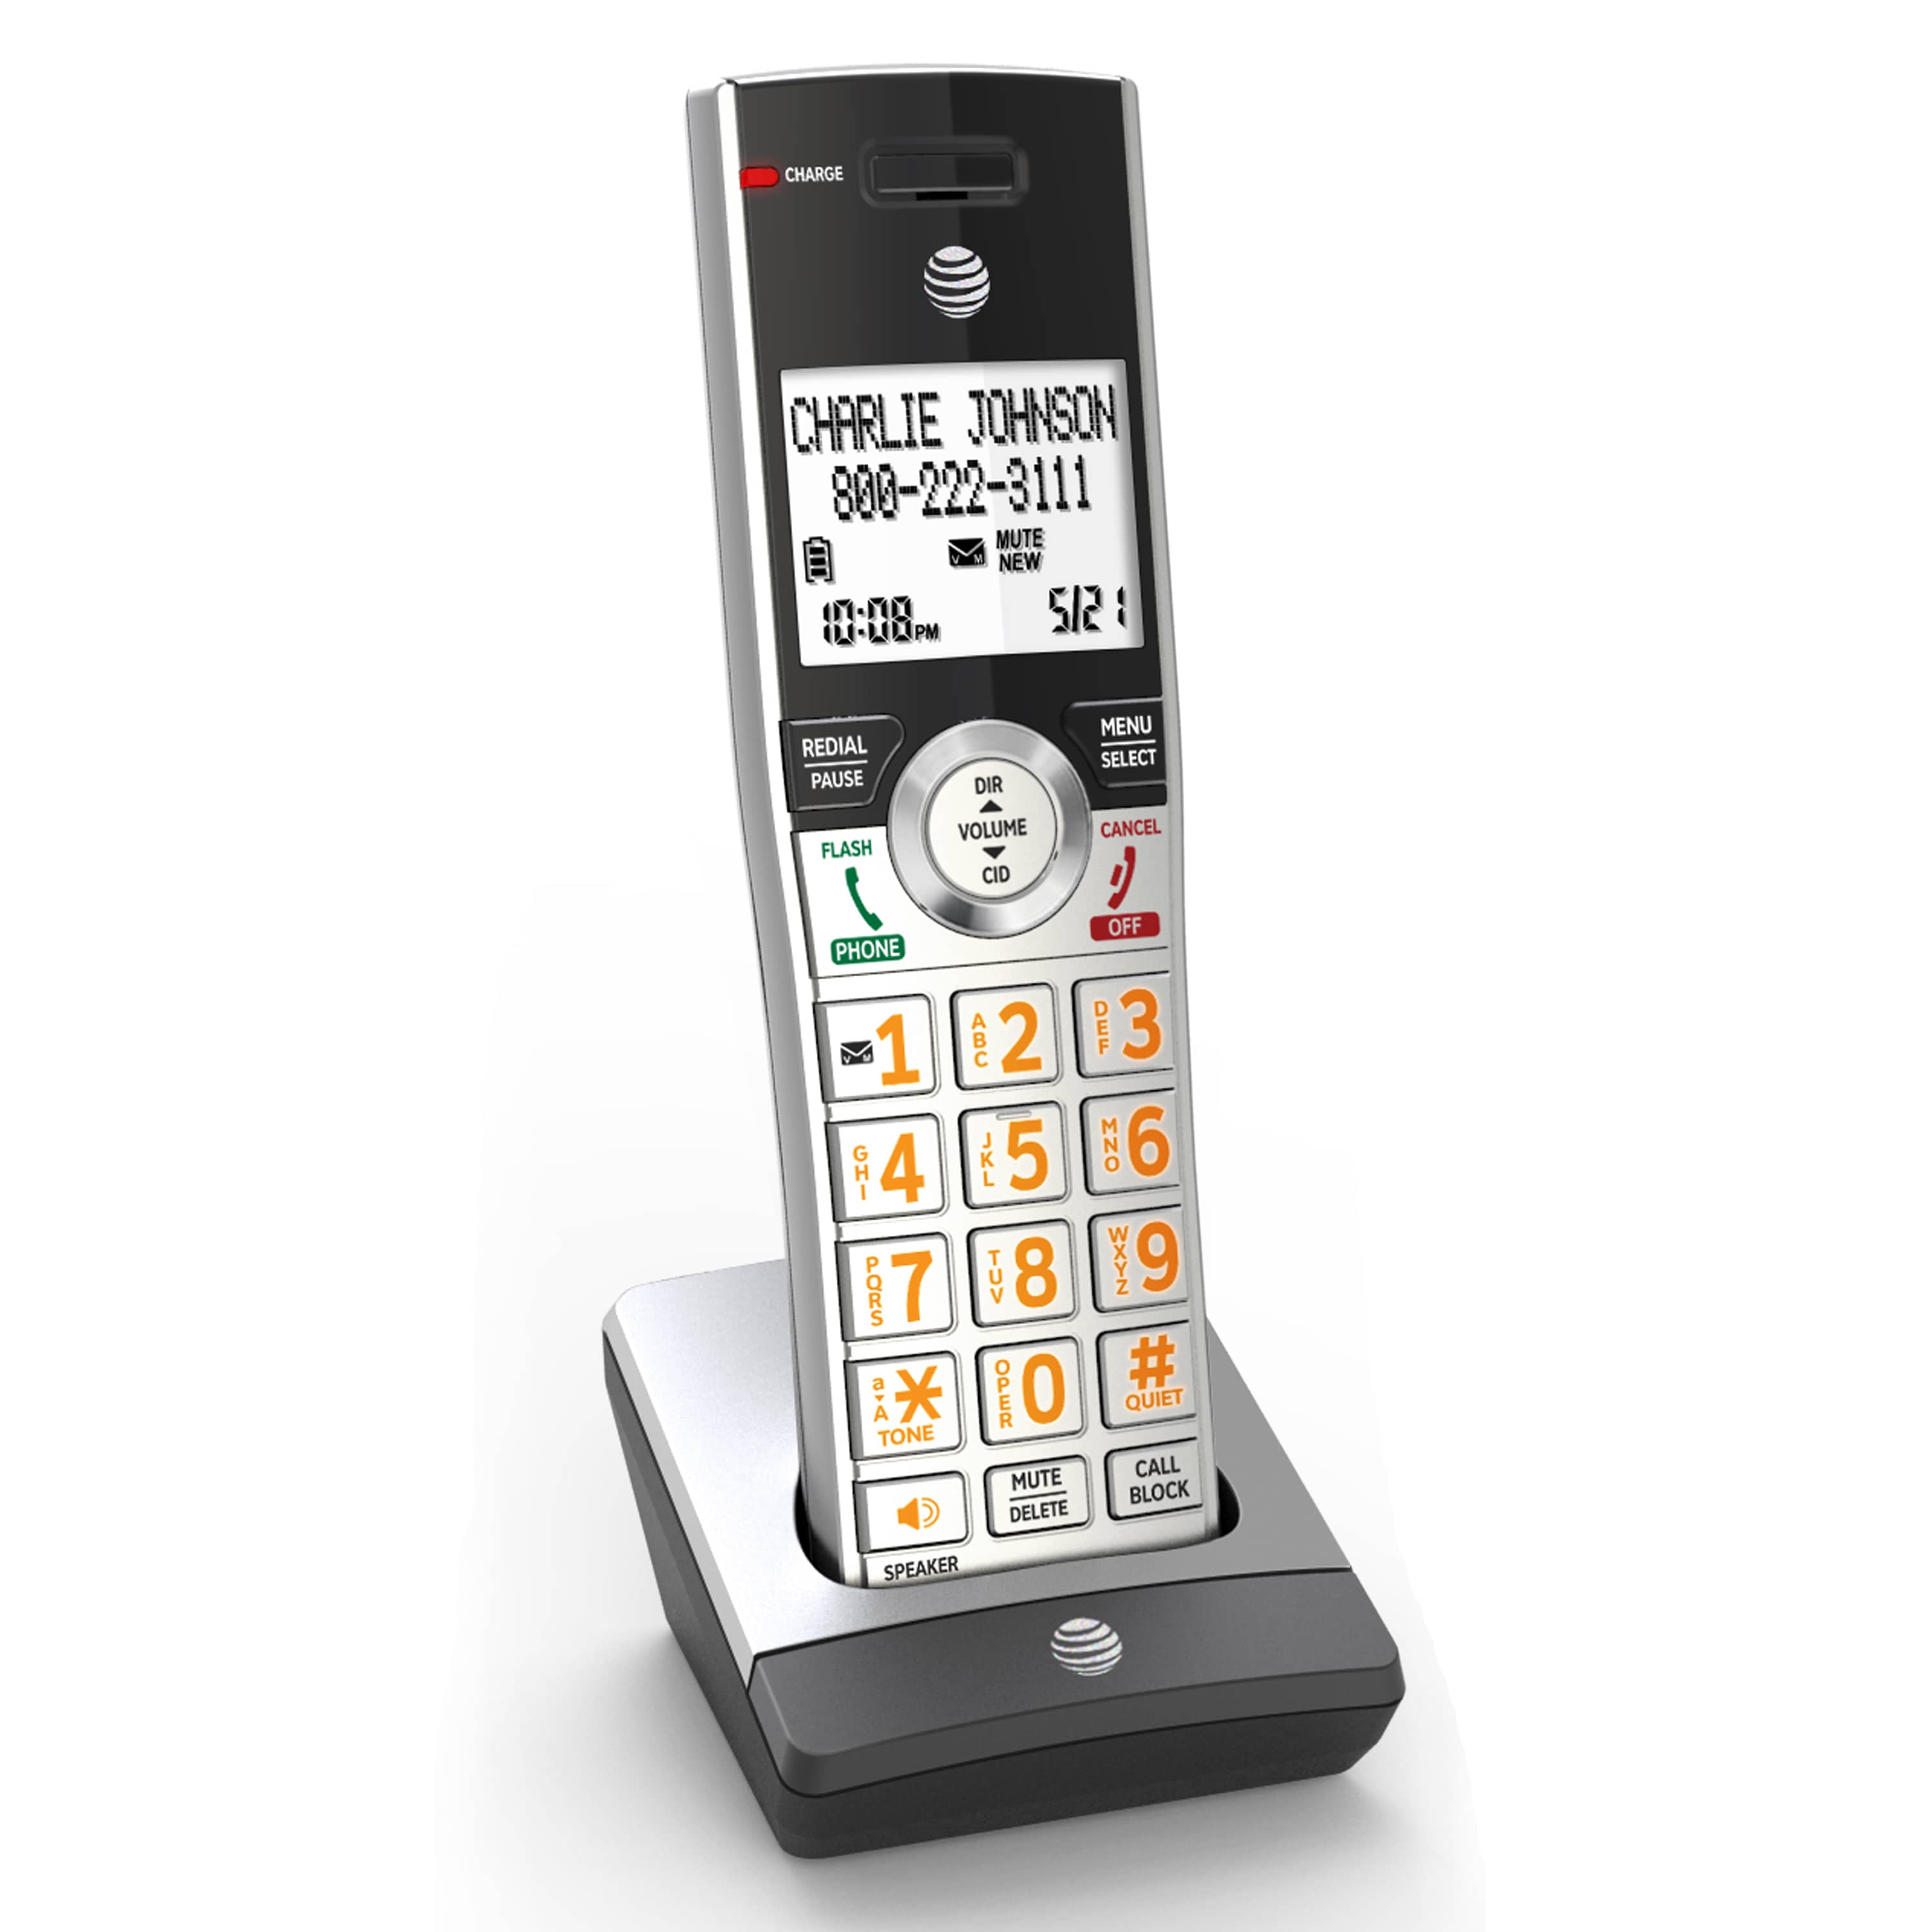 6 handset phone system with smart call blocker - view 5